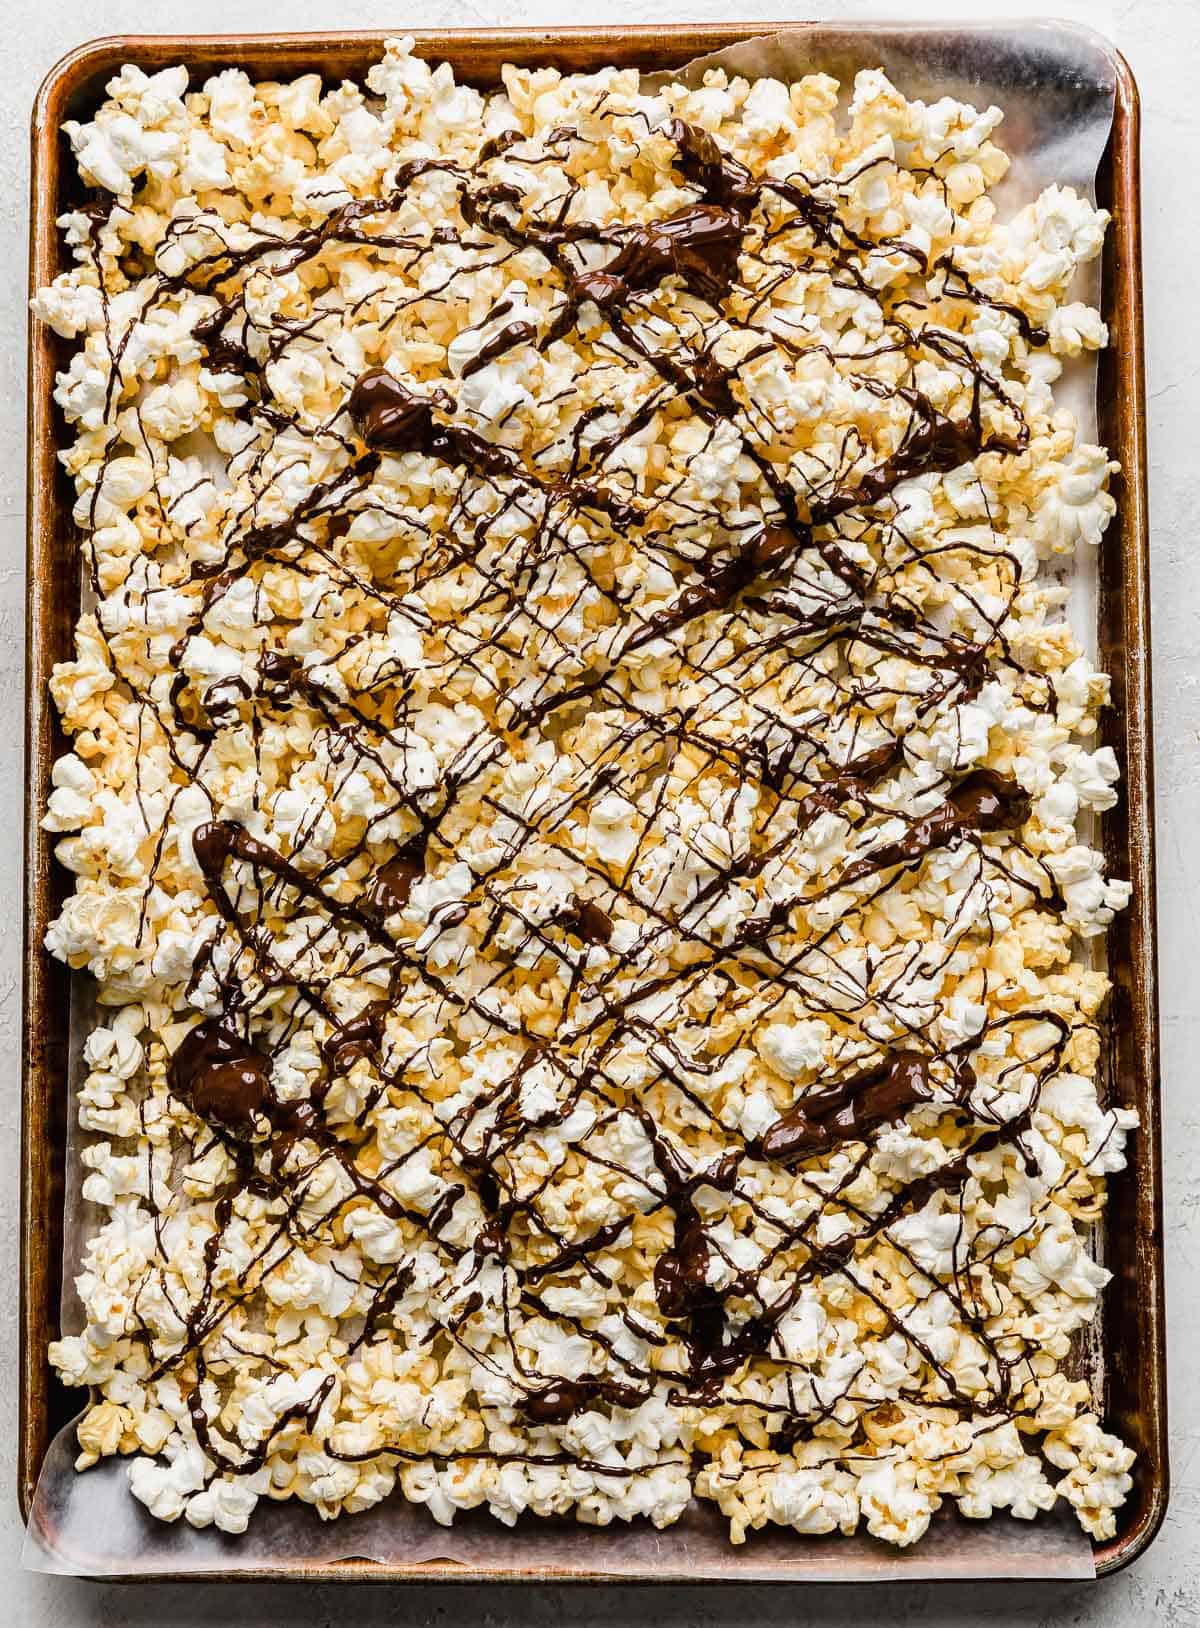 Popped popcorn on a baking sheet with melted dark chocolate drizzled overtop.